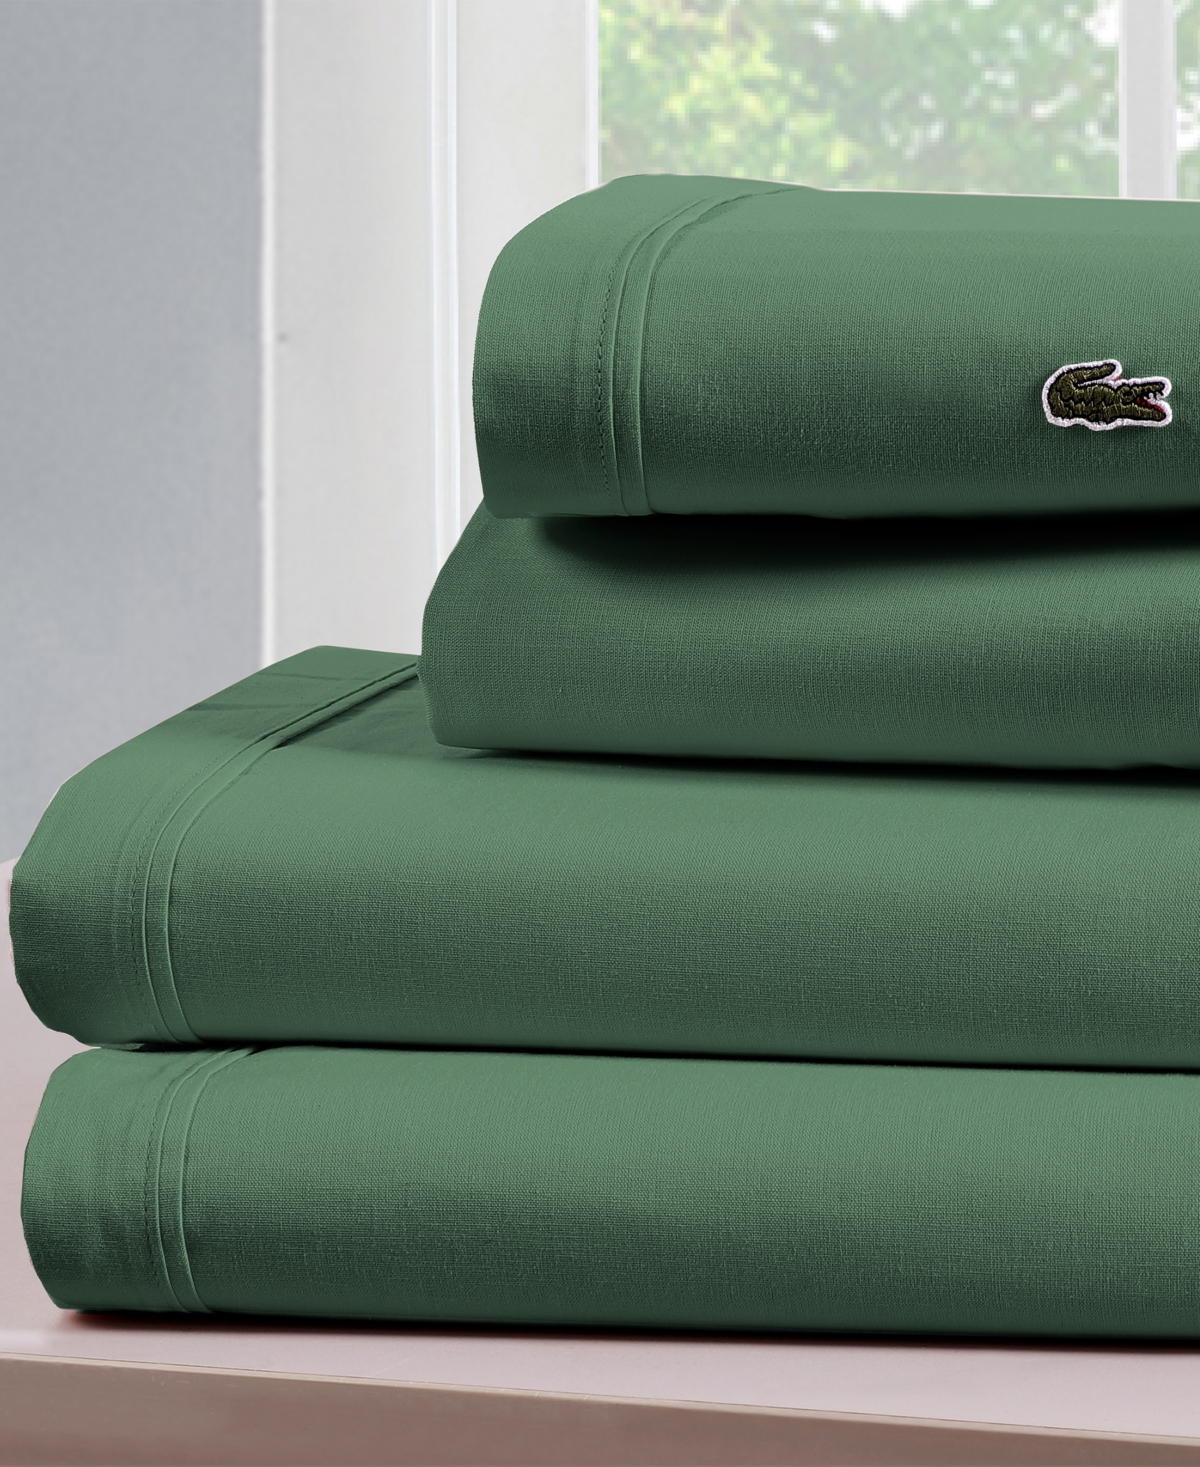 Lacoste Home Solid Cotton Percale Pillowcase Pair, King In Ivy Green